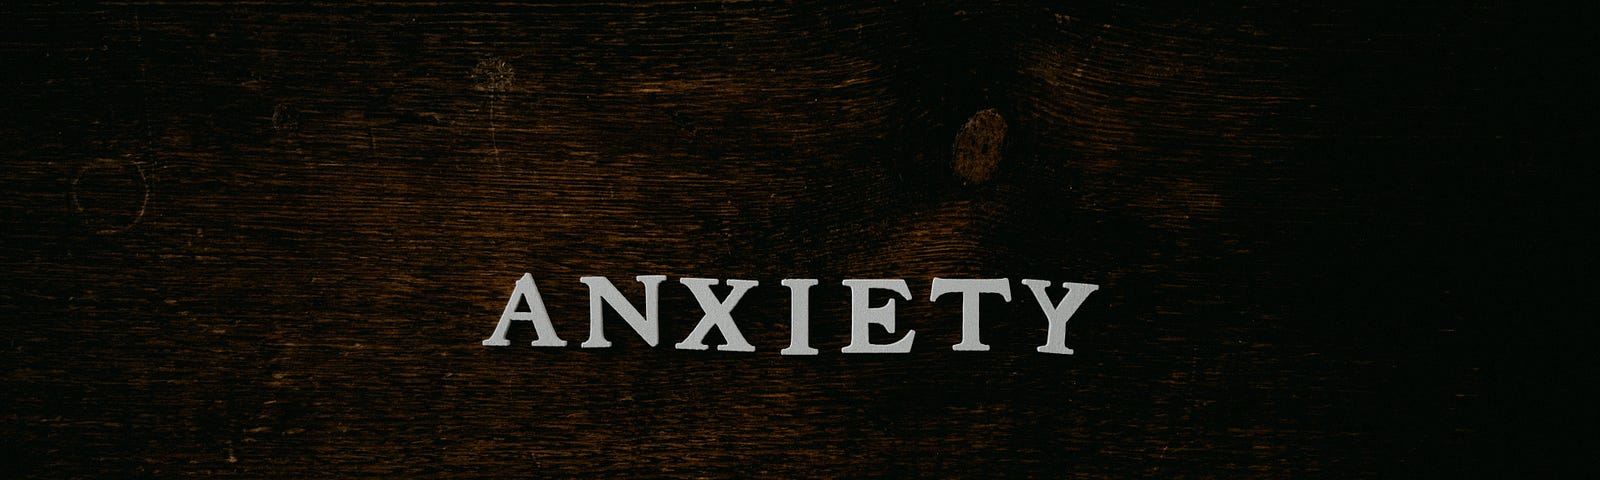 Anxiety written in all caps on a black background